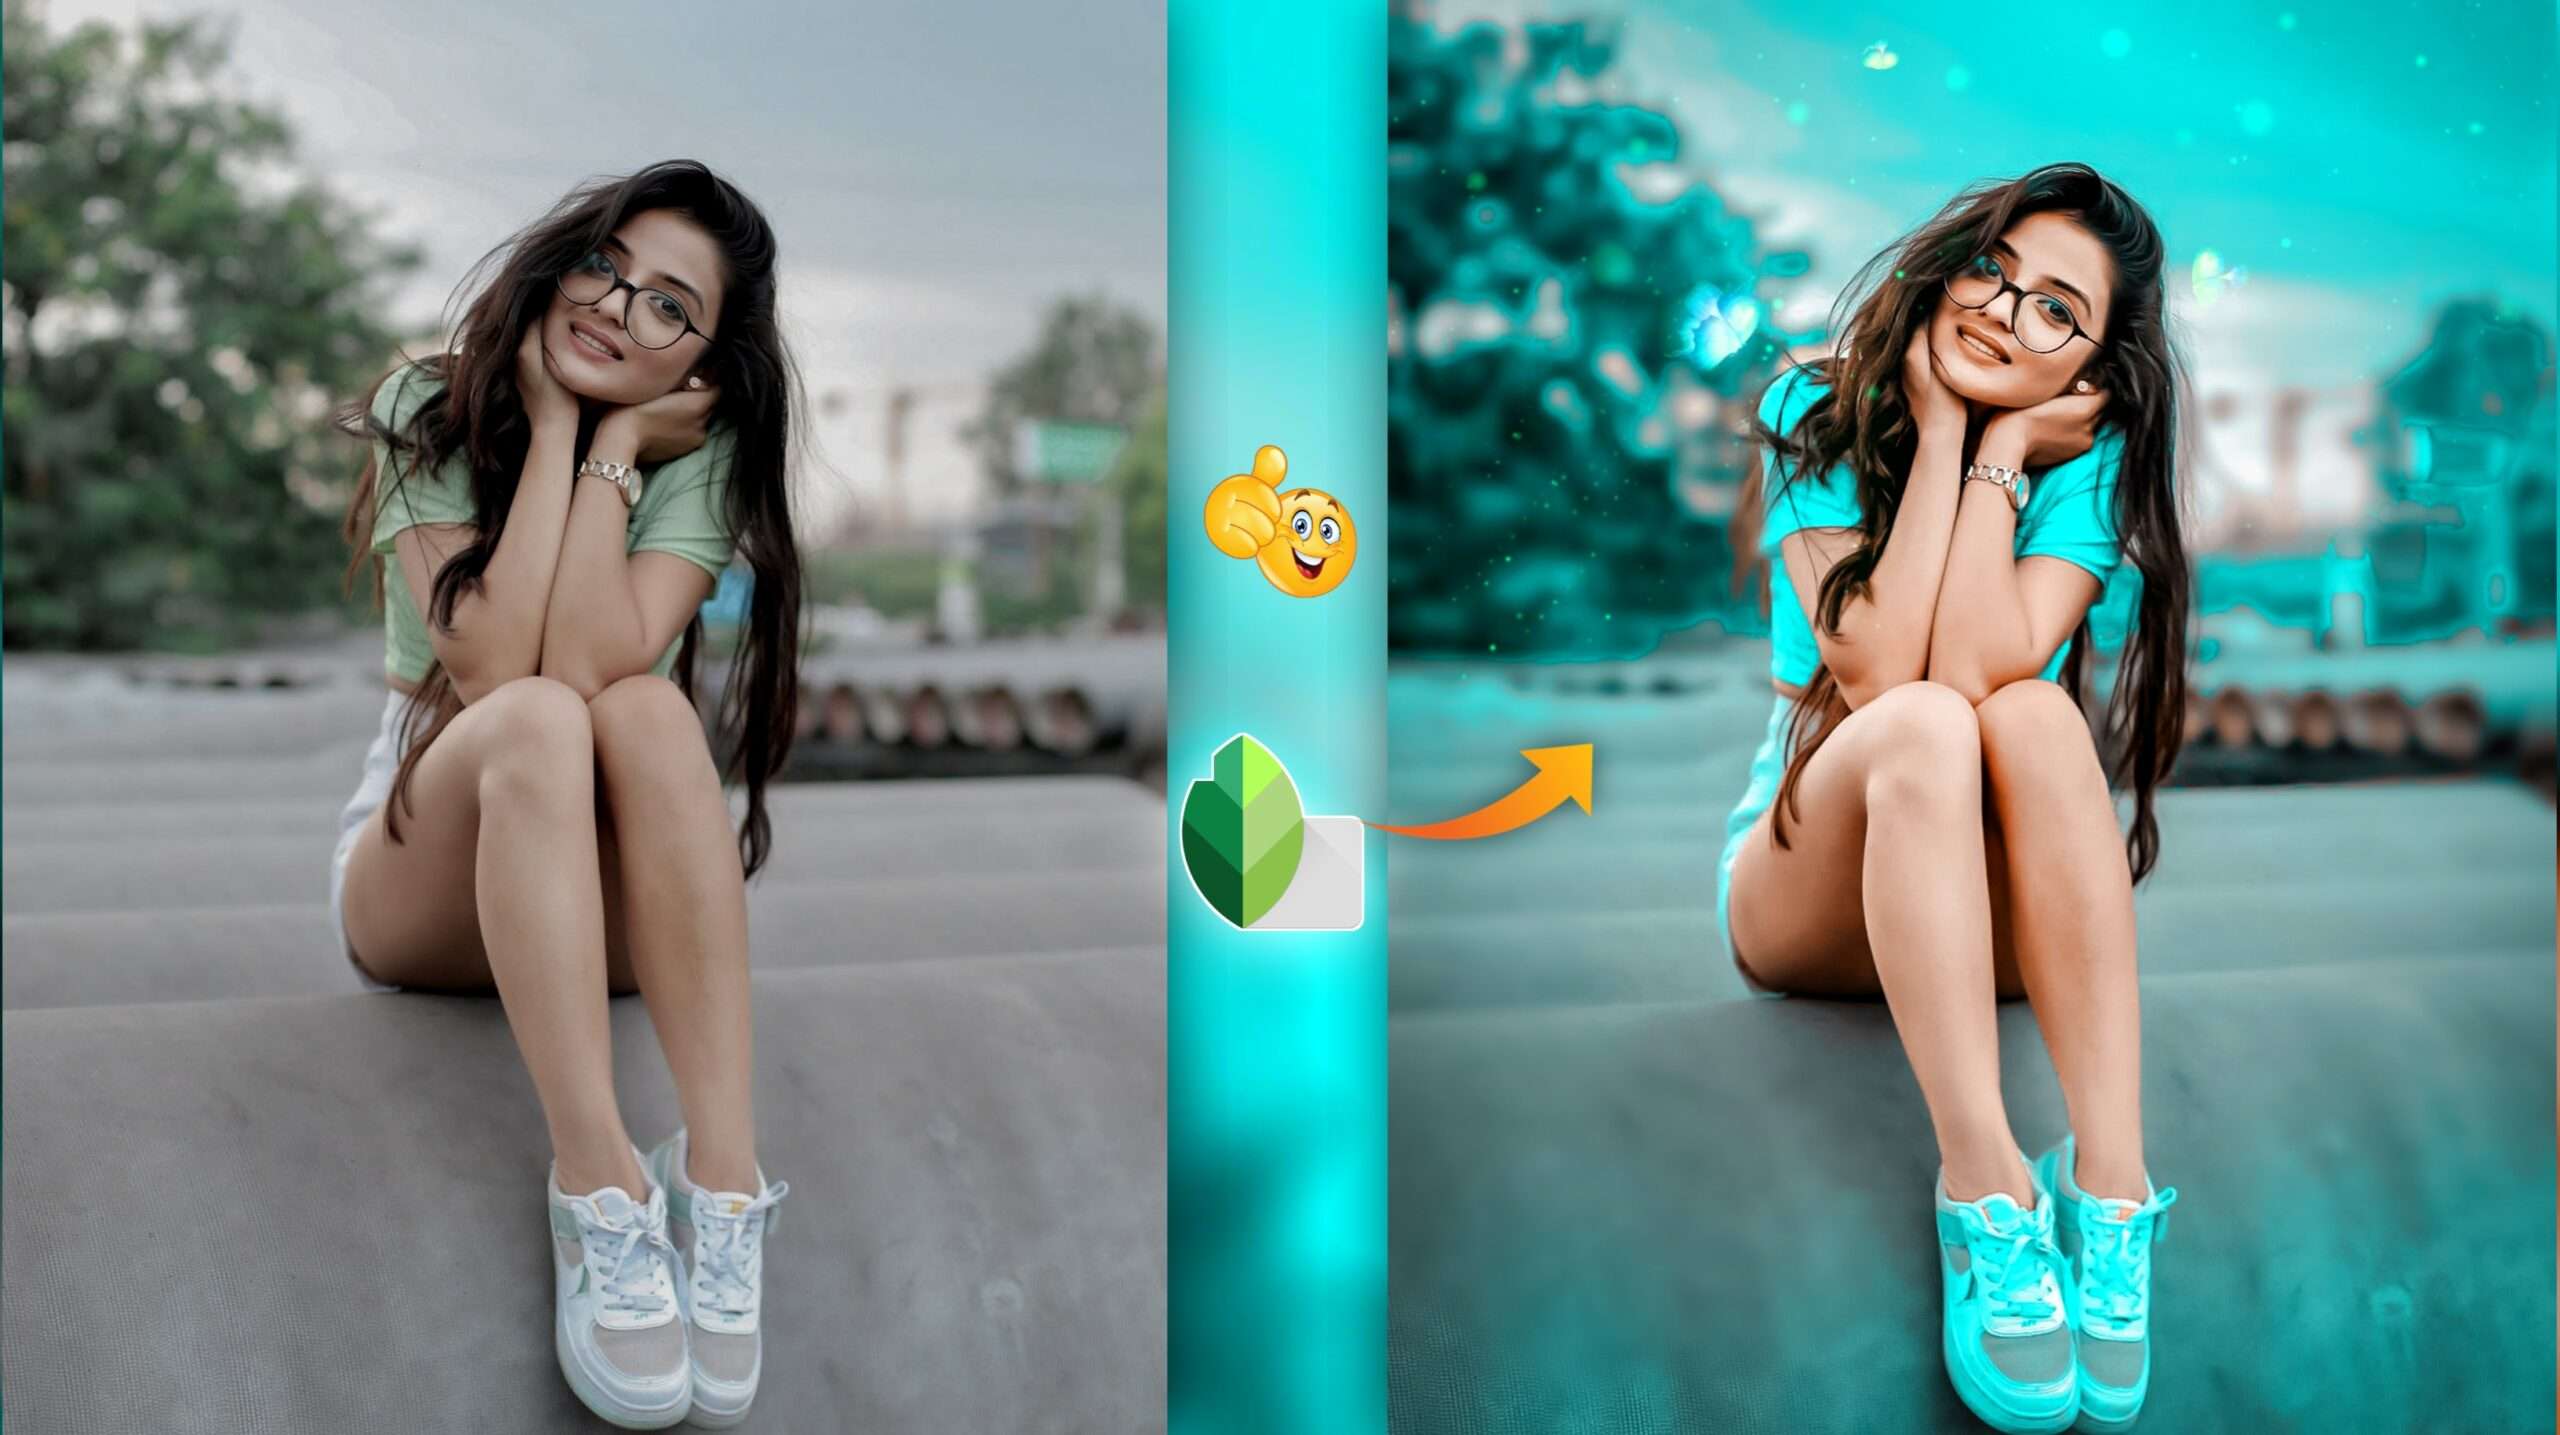 New Snapseed Photo Editing Background change|Snapseed Editing